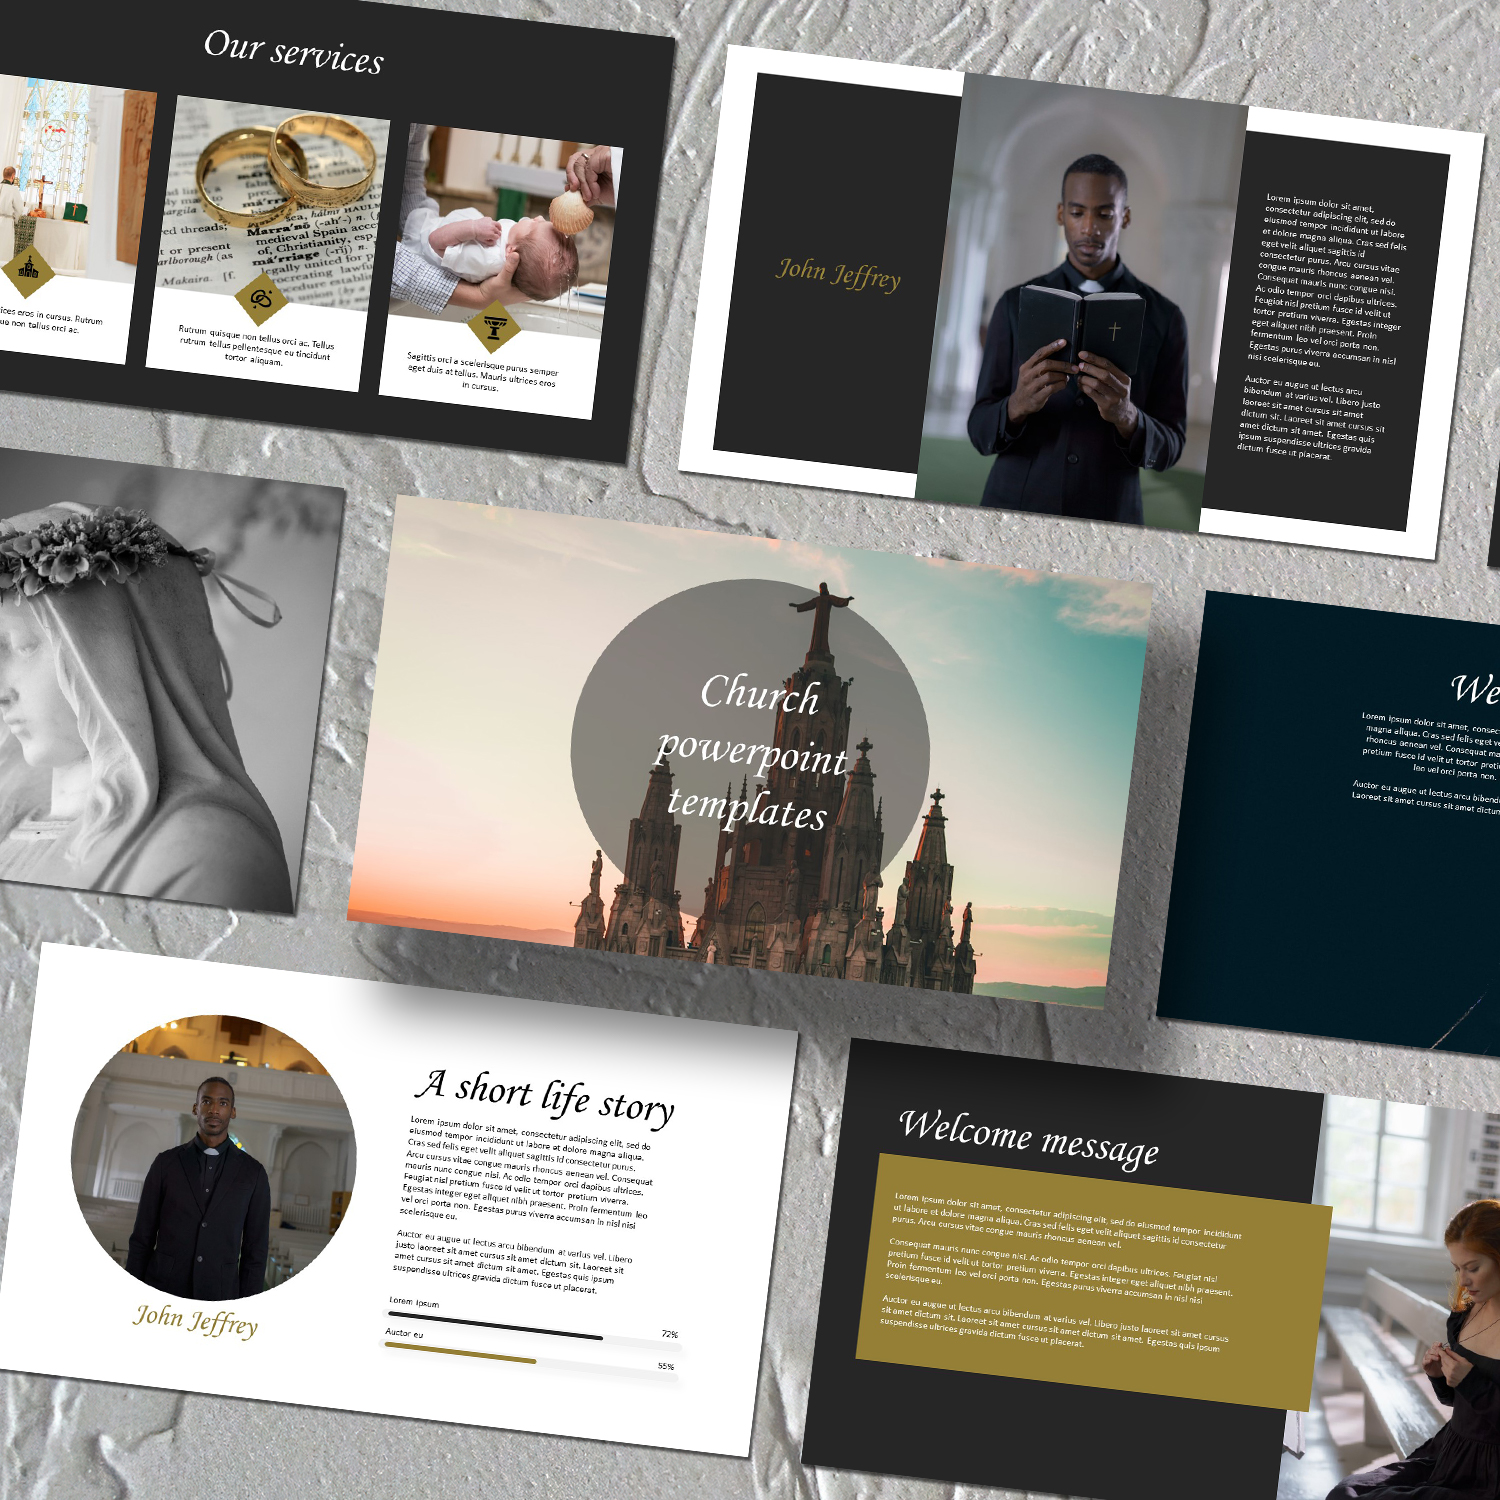 A selection of gorgeous images from a church presentation template.